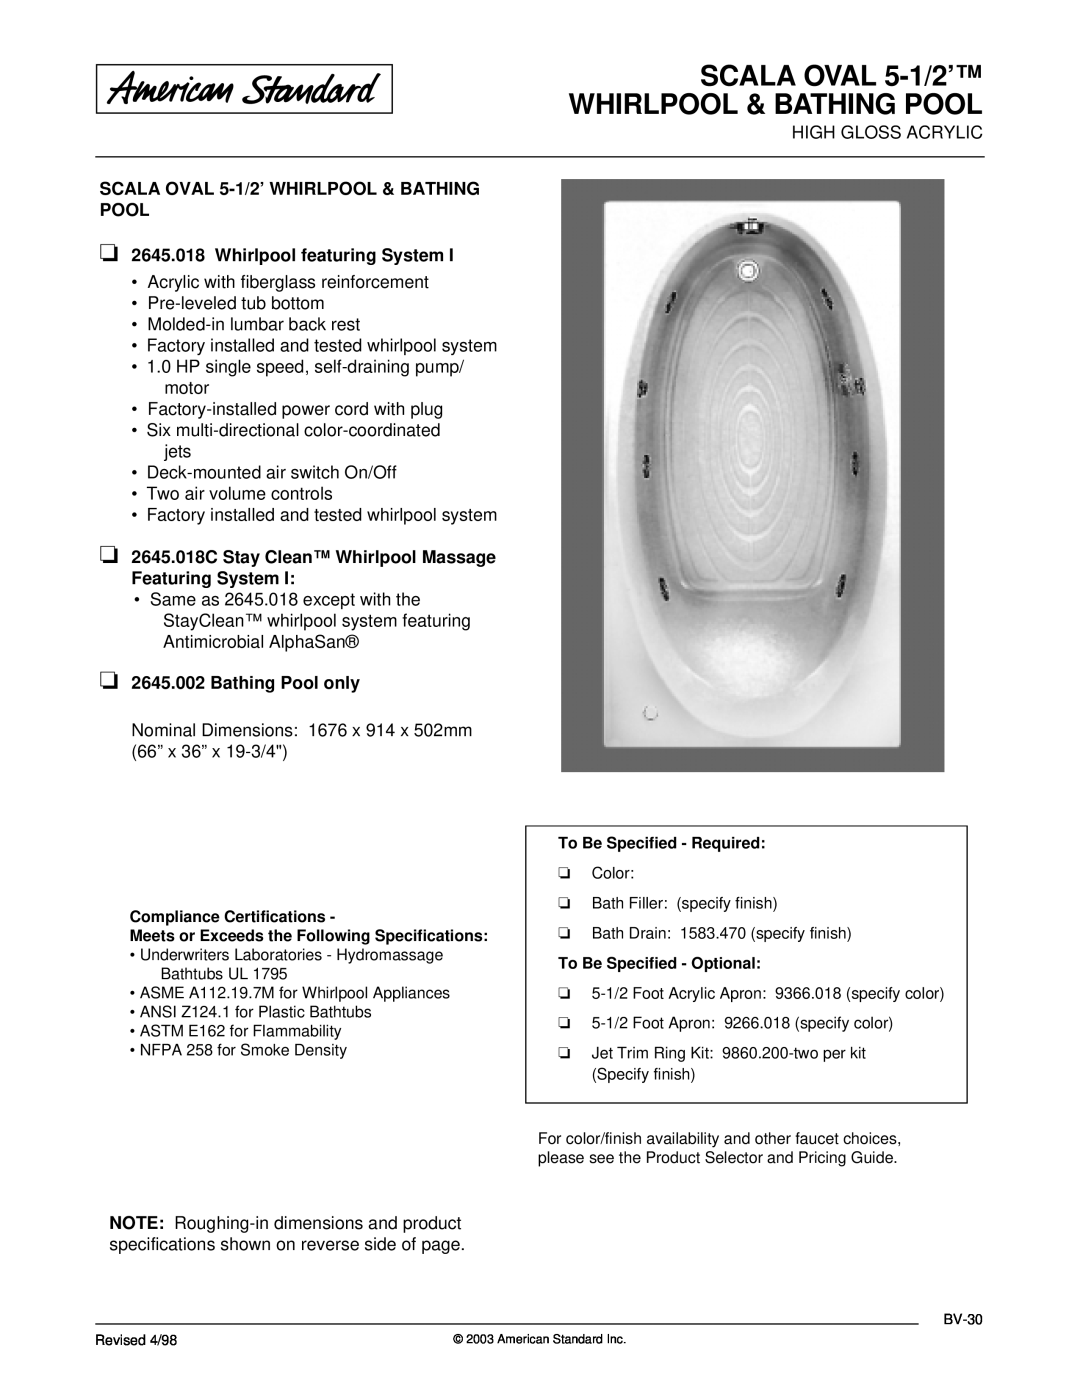 American Standard 2645.018C, 2645.002 dimensions SCALA OVAL 5-1/2’ WHIRLPOOL & BATHING POOL, Whirlpool featuring System 